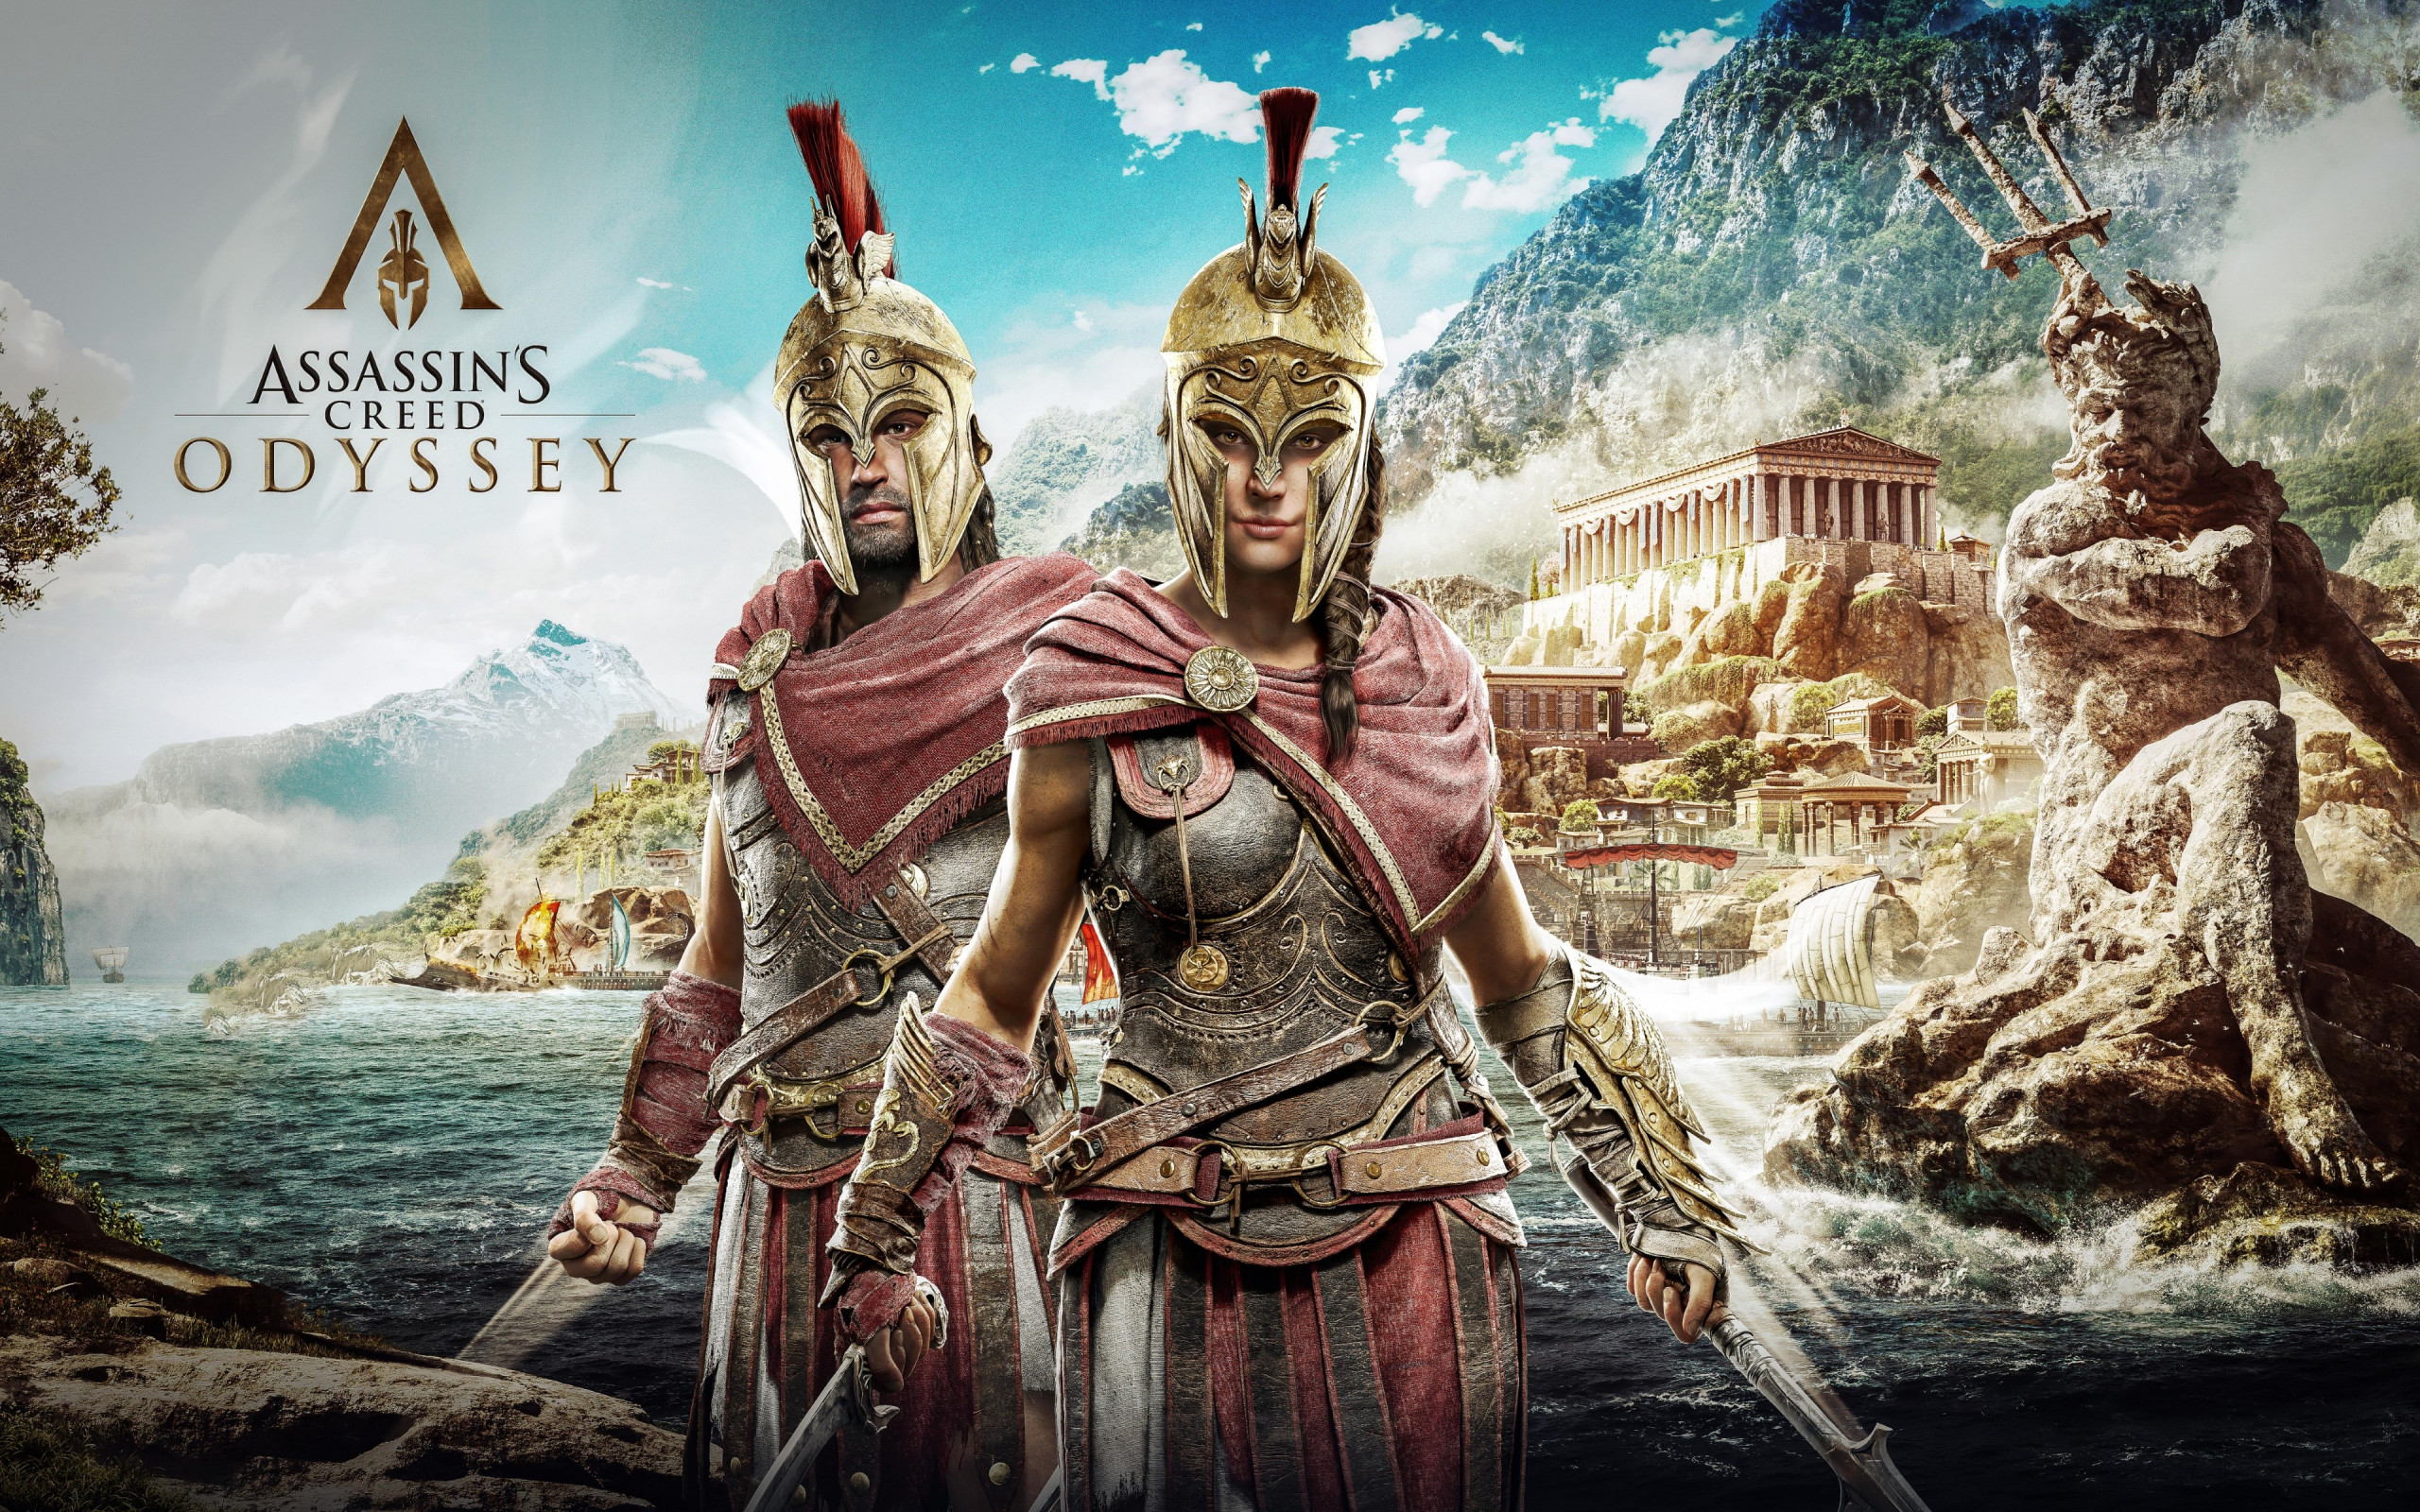 Download wallpaper: Assassin's Creed Odyssey poster 2560x1600